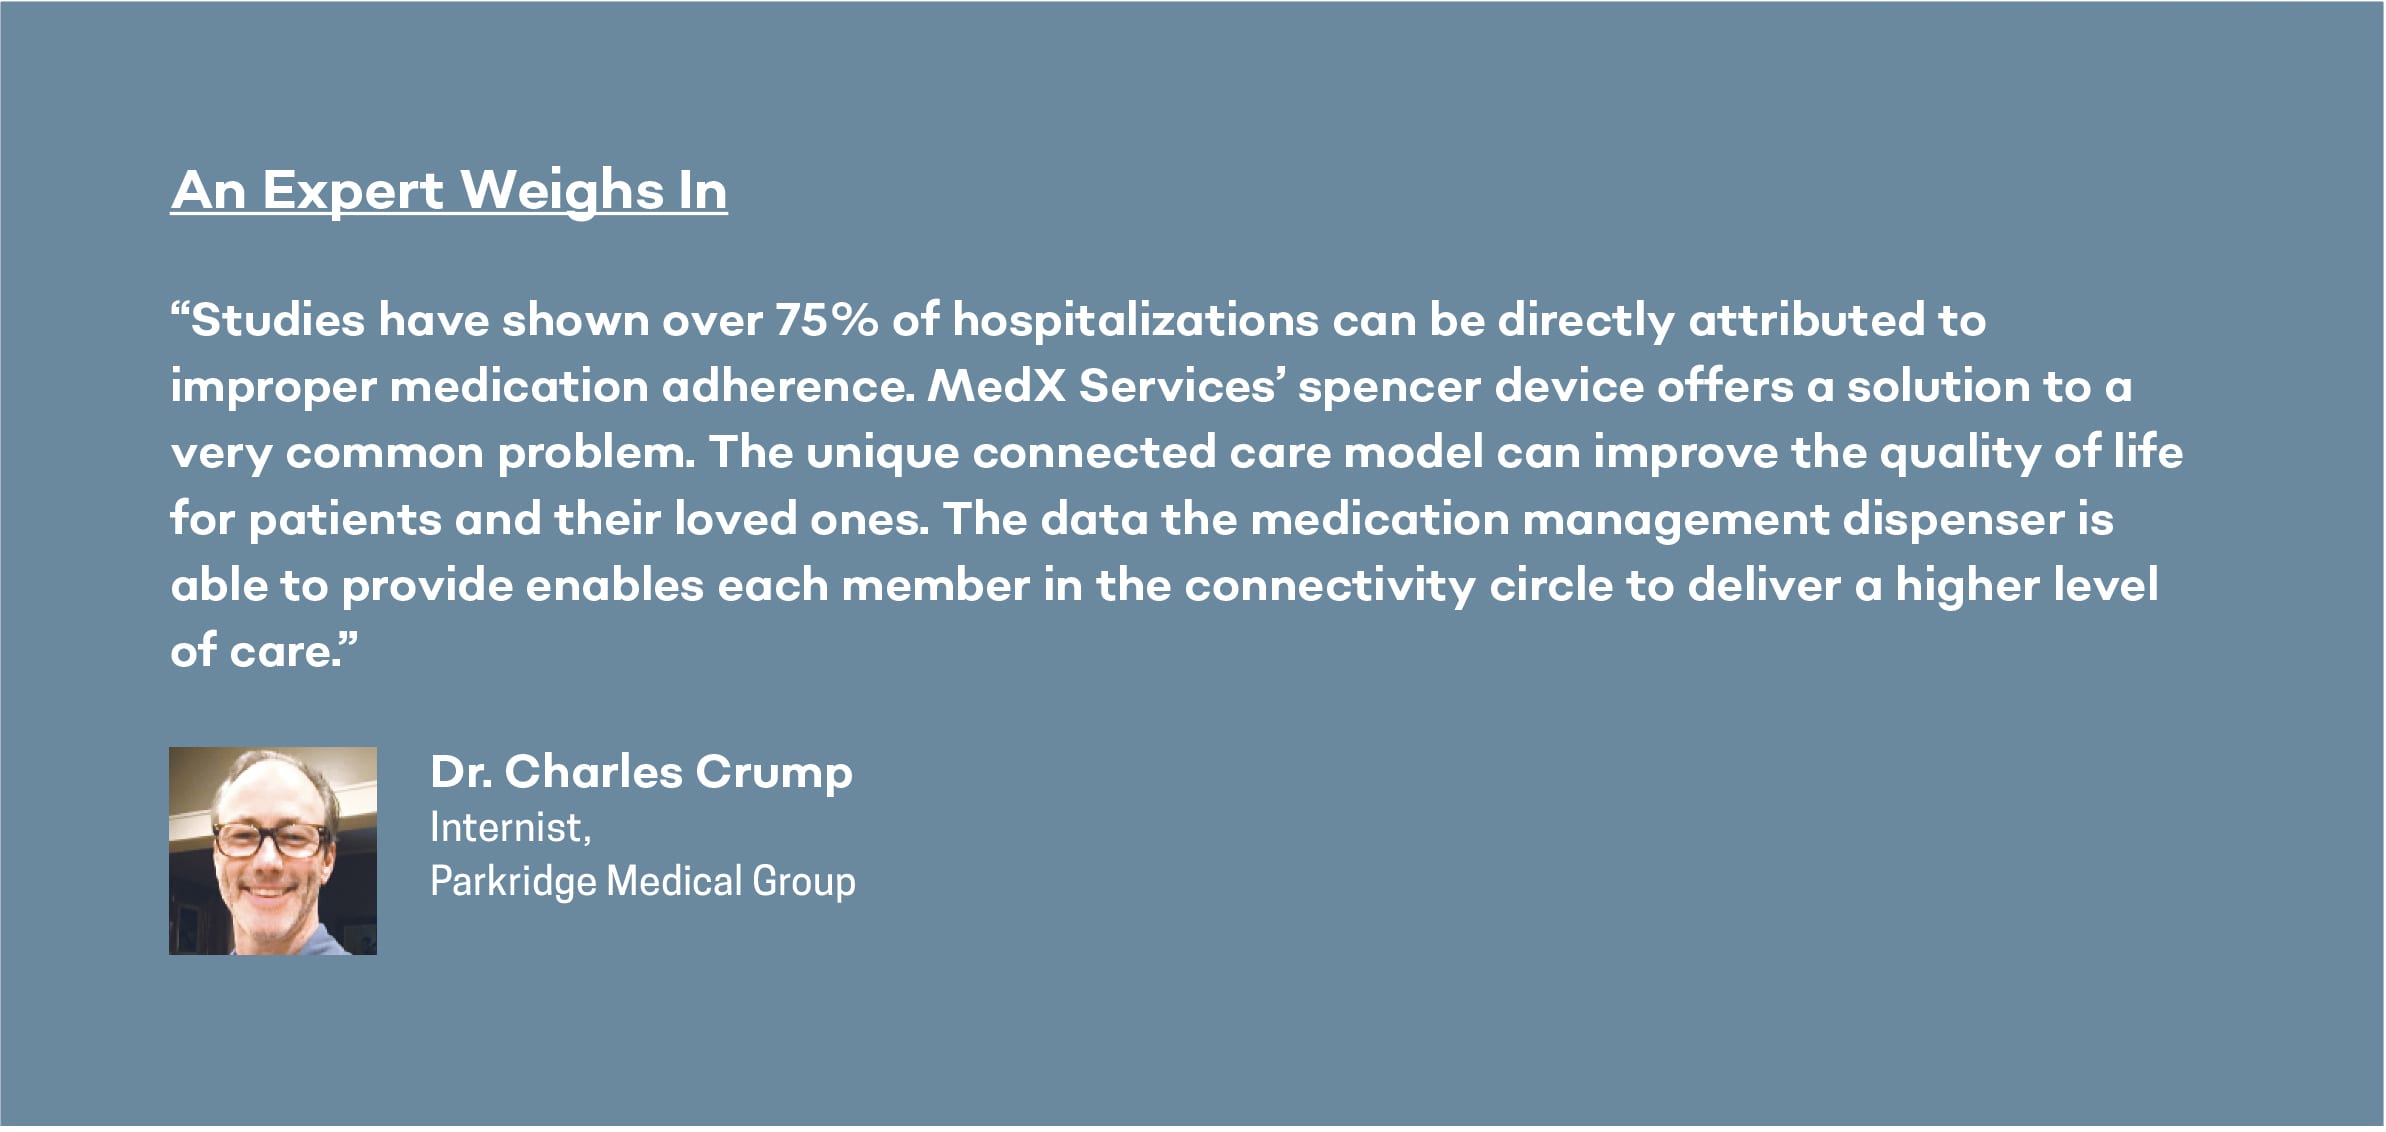 Expert opinion on spencer device from MedX services for managing medications from Dr. Charles Crump